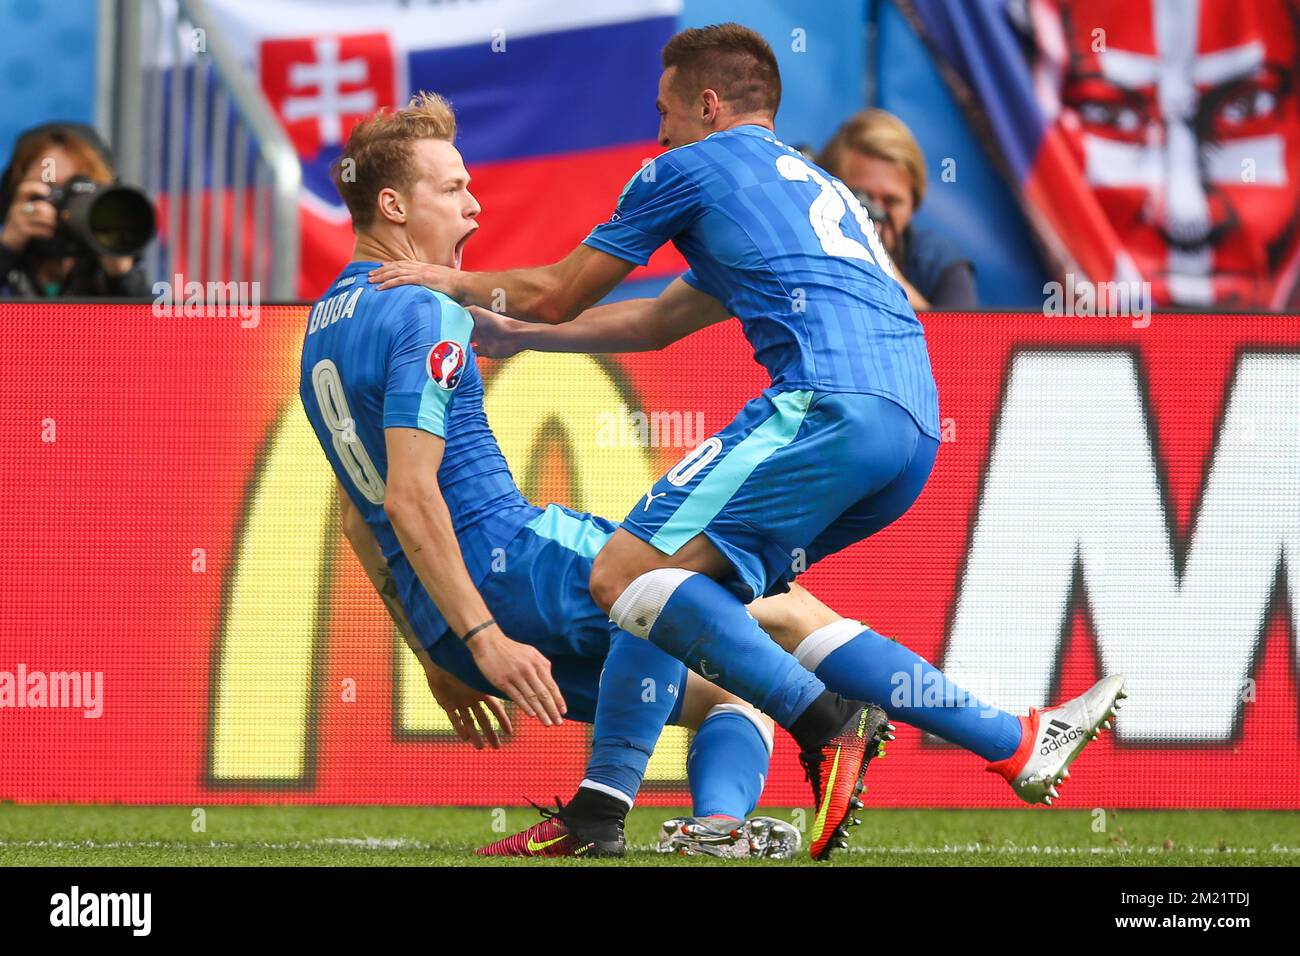 Slovakian Ondrej Duda celebrates after scoring during a soccer game between Wales and Slovakia, in group B of the group stage of the UEFA Euro 2016 European Championships, Saturday 11 June 2016 in Bordeaux, France. BELGA PHOTO BRUNO FAHY Stock Photo